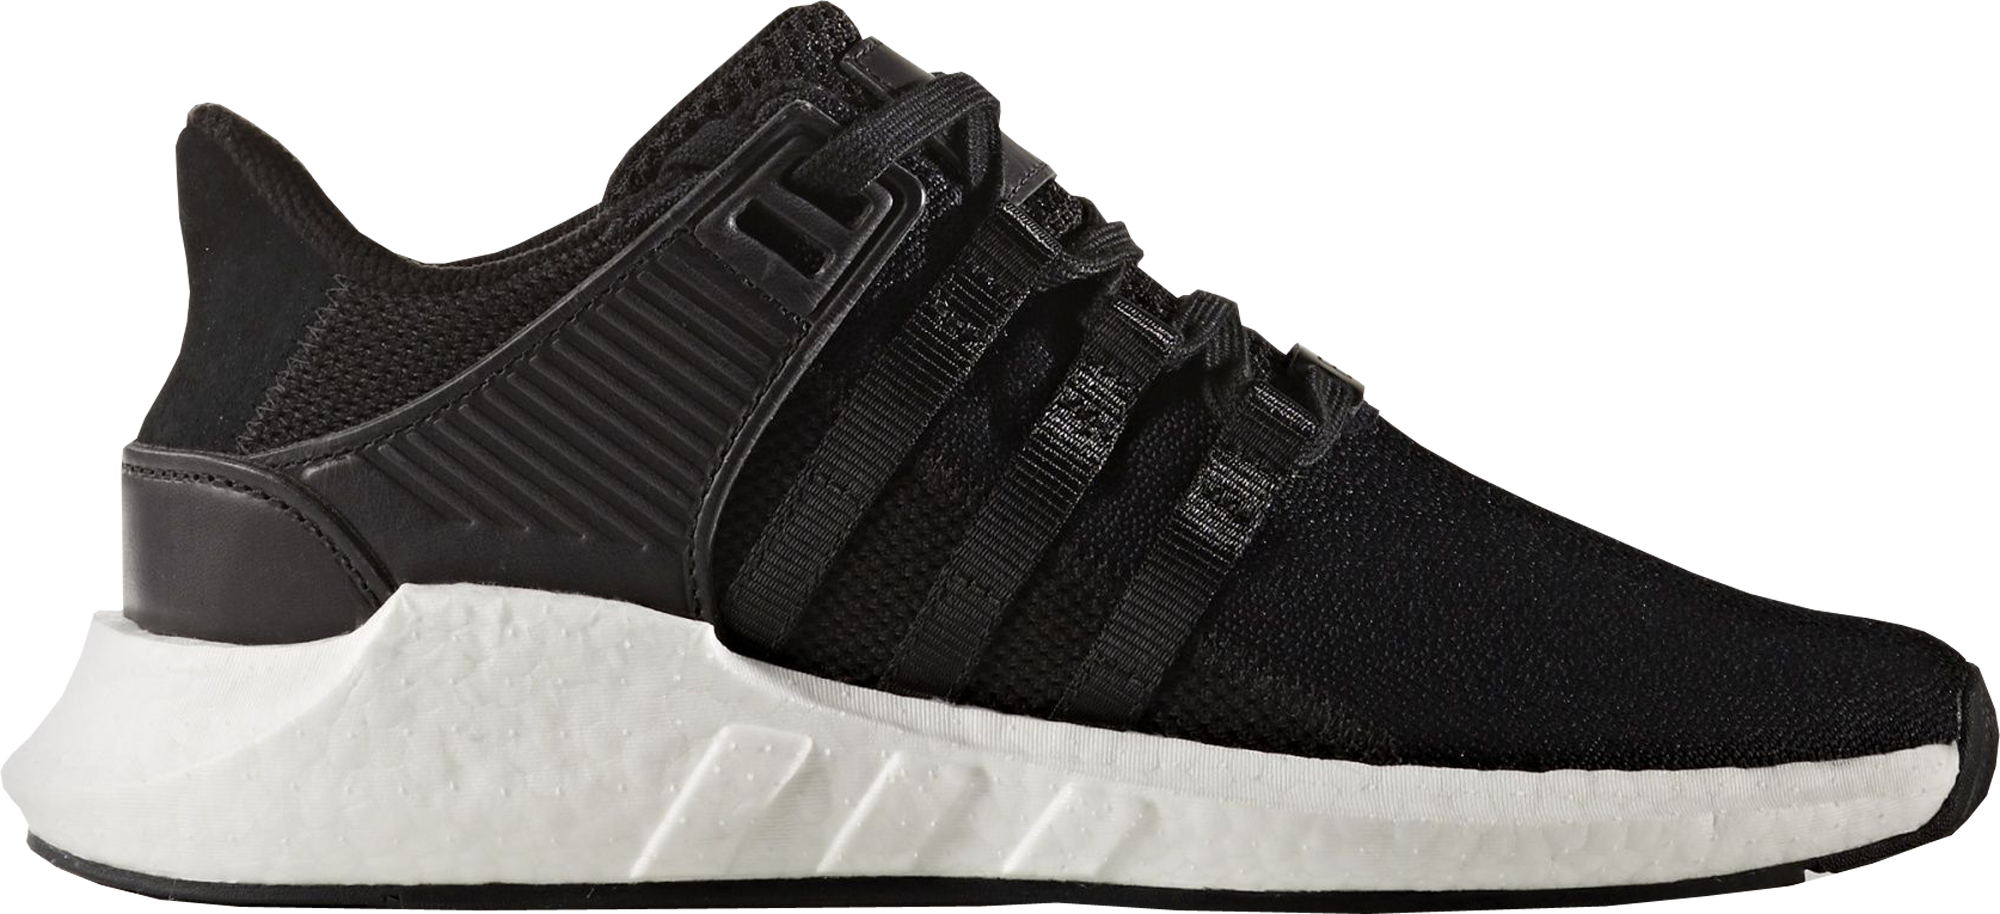 adidas EQT Support 93/17 Milled Leather 